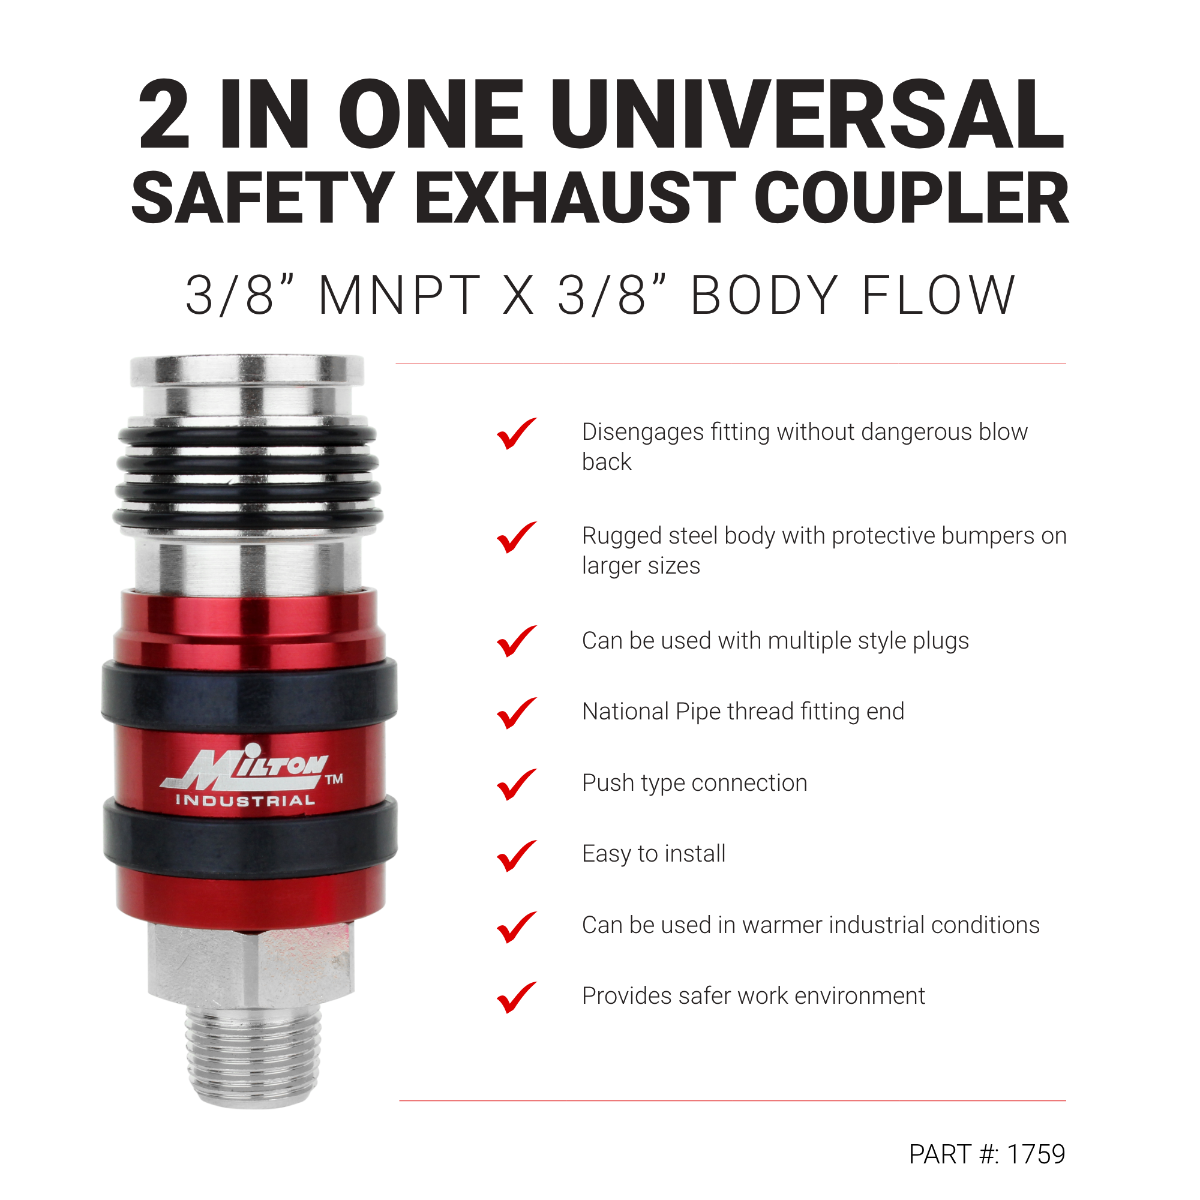 2-In-ONE Universal Safety Exhaust Industrial Coupler, 3/8